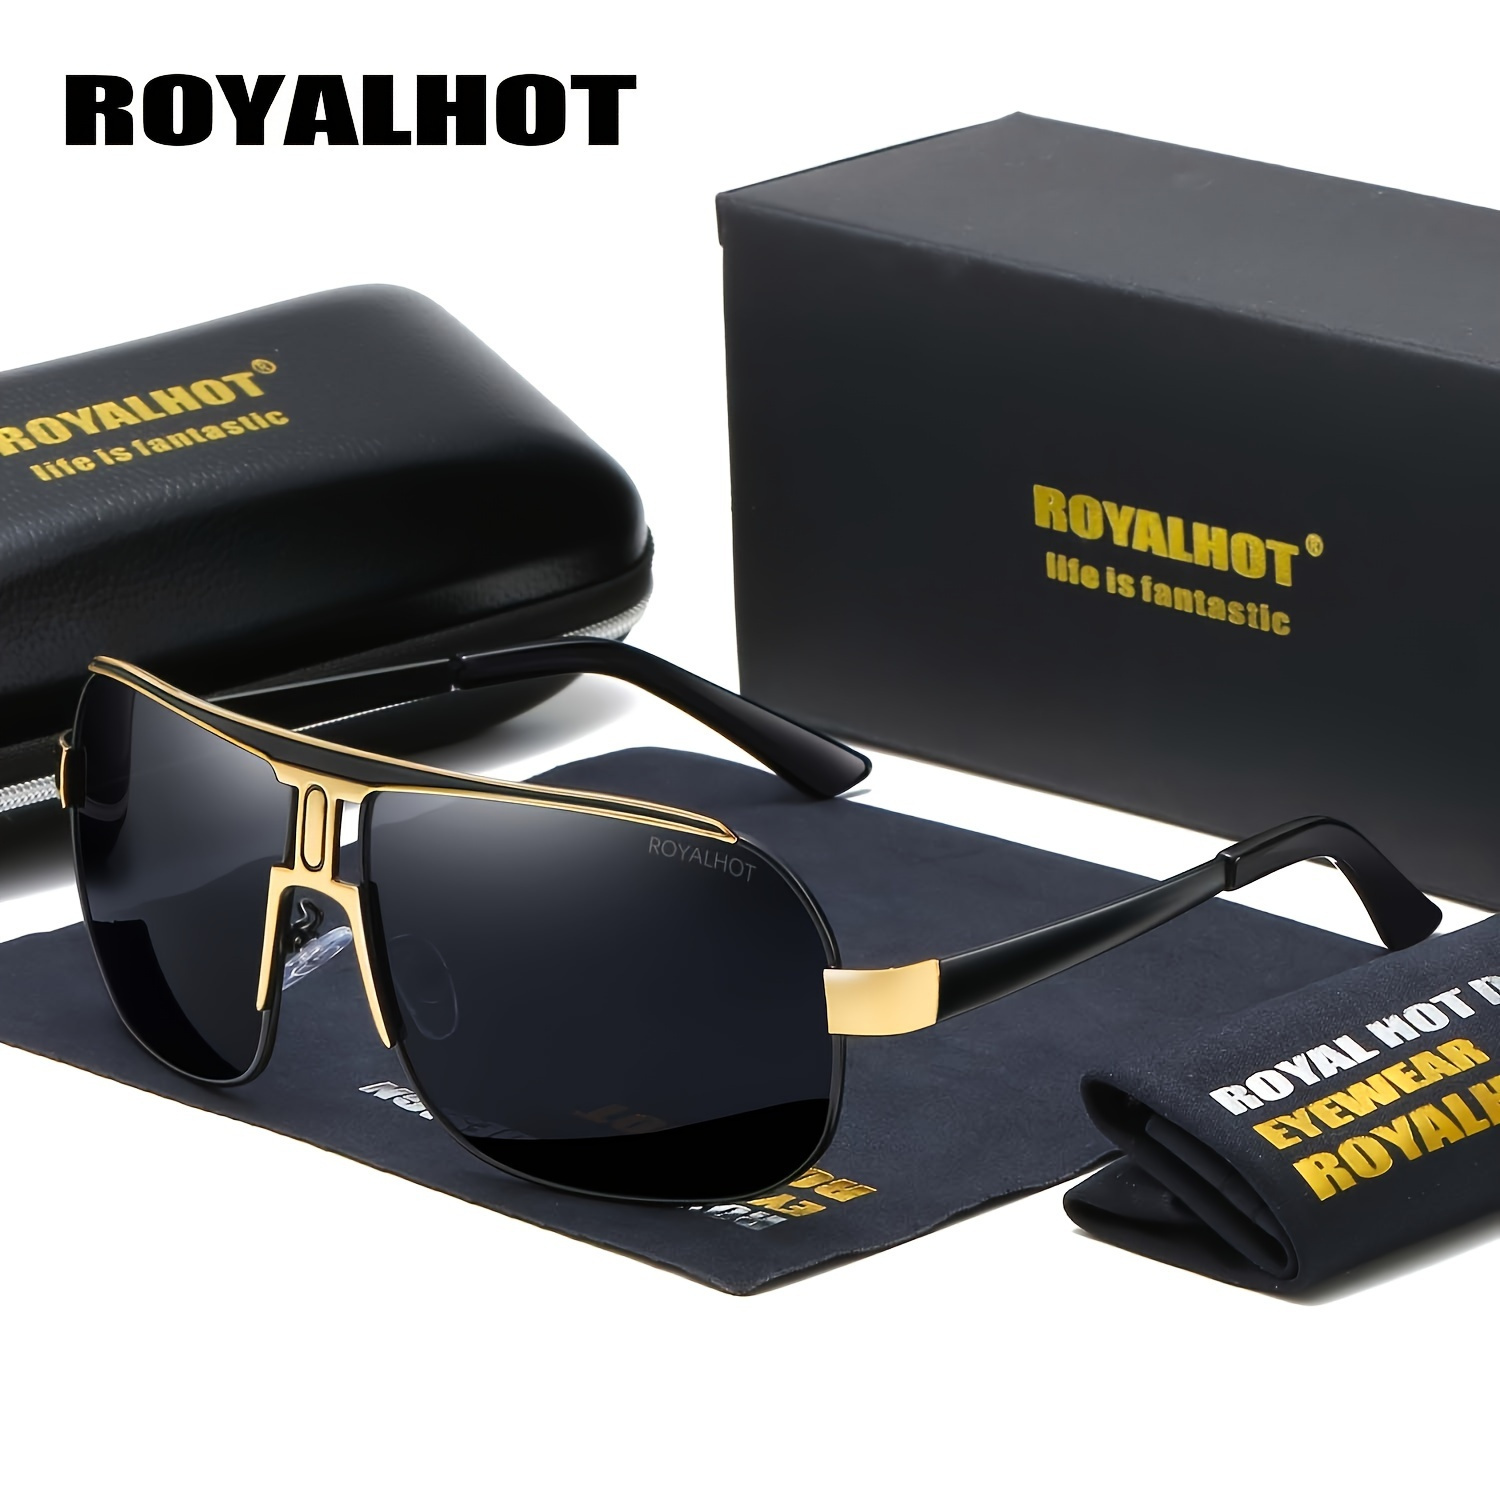 

Royalhot Unisex Polarized Glasses, Oversized Metal Alloy Square Frame, Driving Shades With Case, Comfortable Nose Pads, Sturdy Hinges